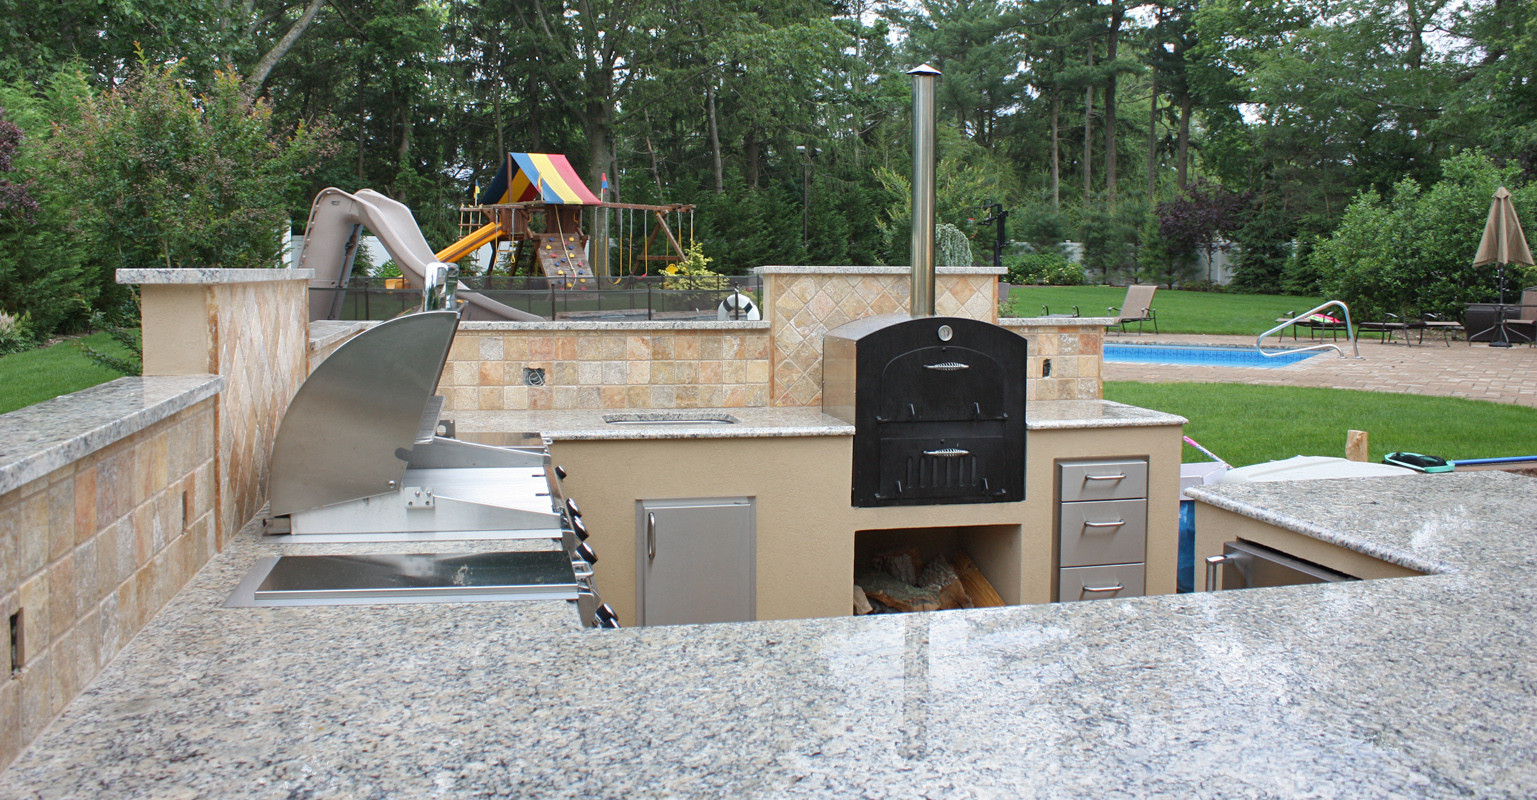 Nyc Fireplaces &amp; Outdoor Kitchens
 nyc fireplaces NYC Fireplaces & Outdoor Kitchens